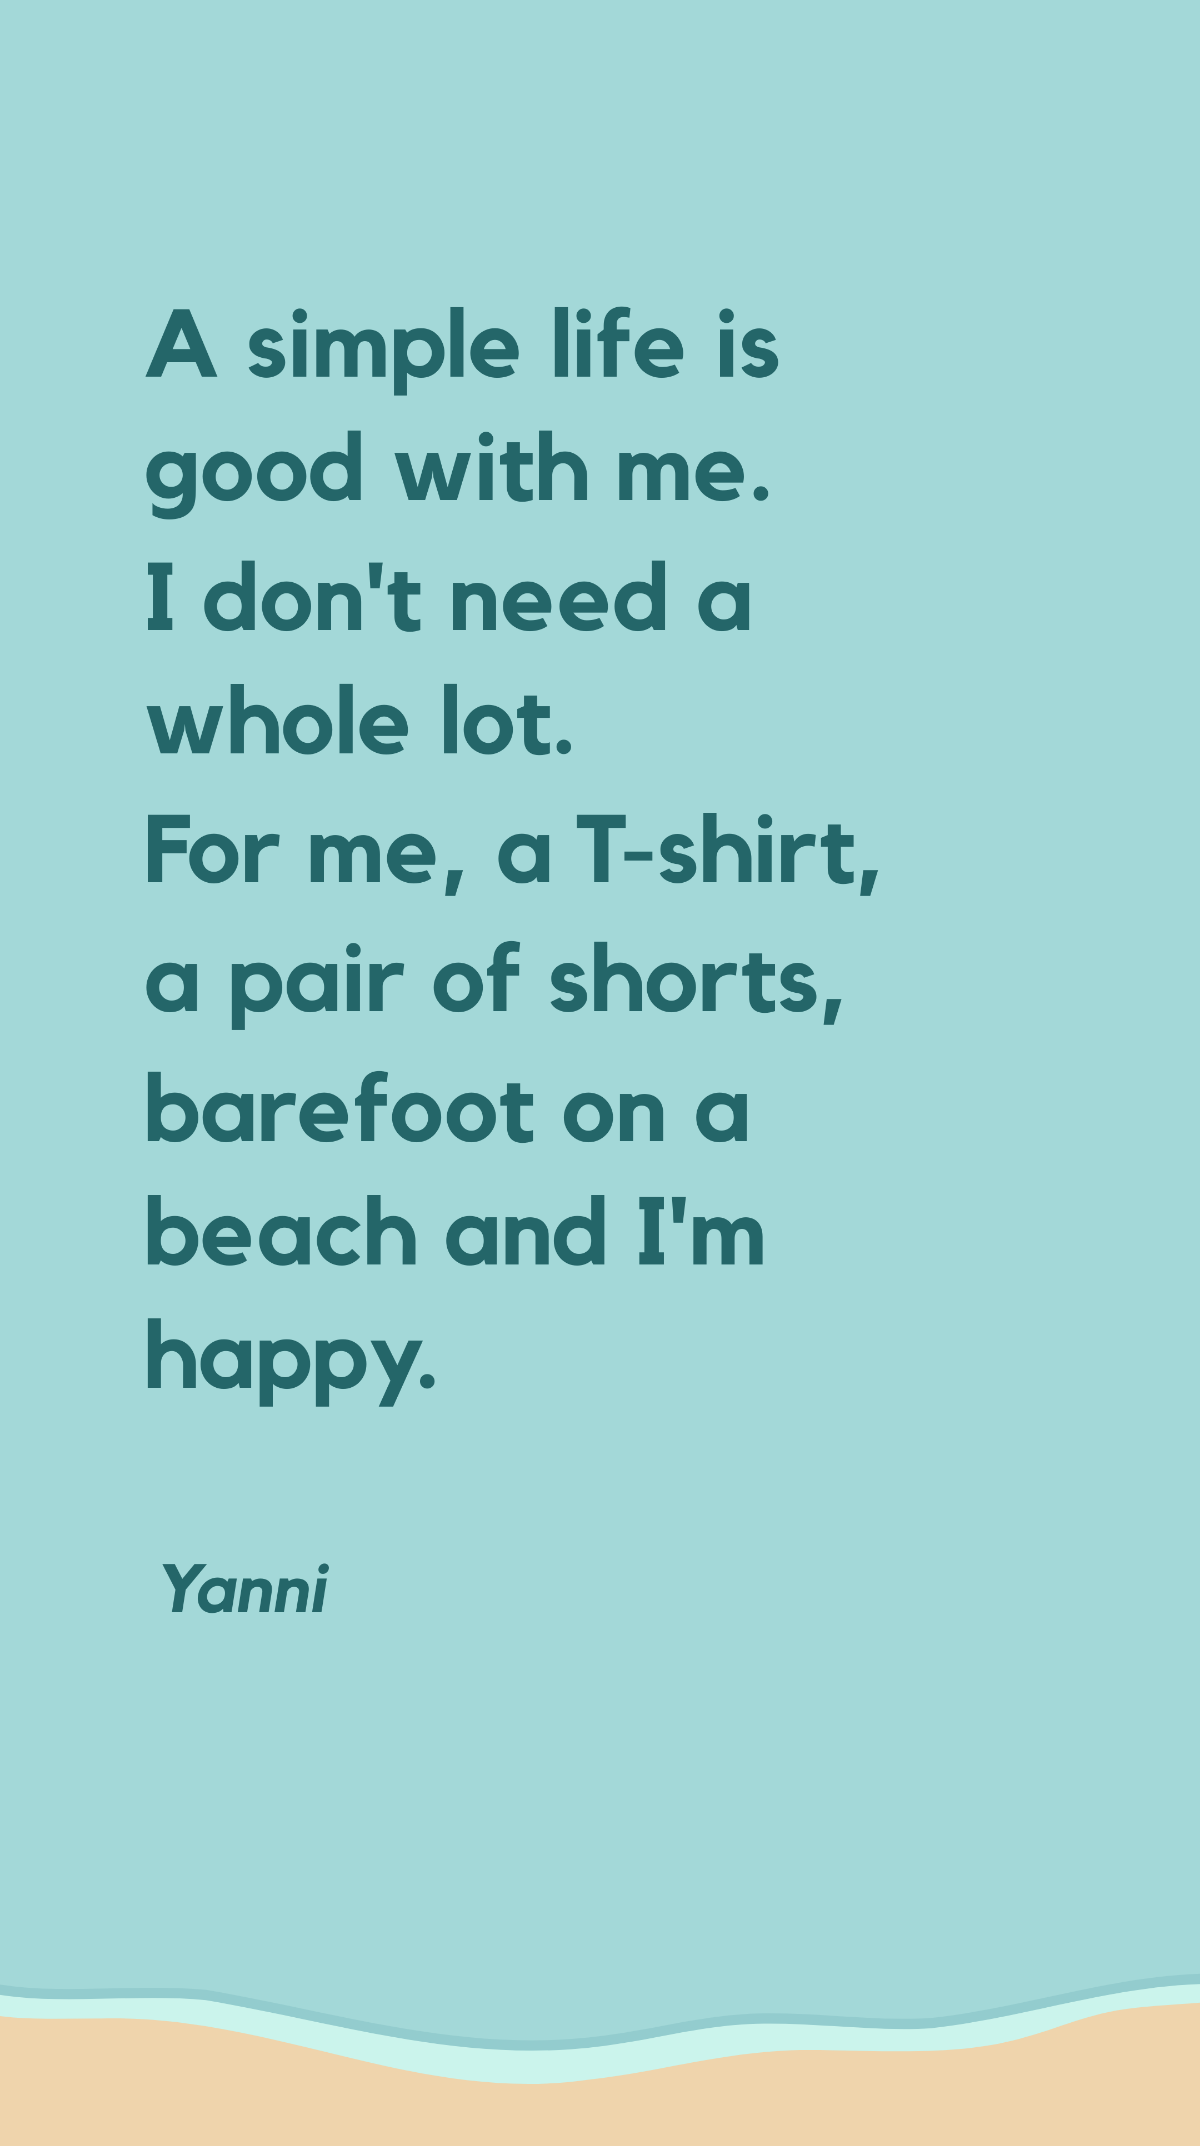 Yanni - A simple life is good with me. I don't need a whole lot. For me, a T-shirt, a pair of shorts, barefoot on a beach and I'm happy.